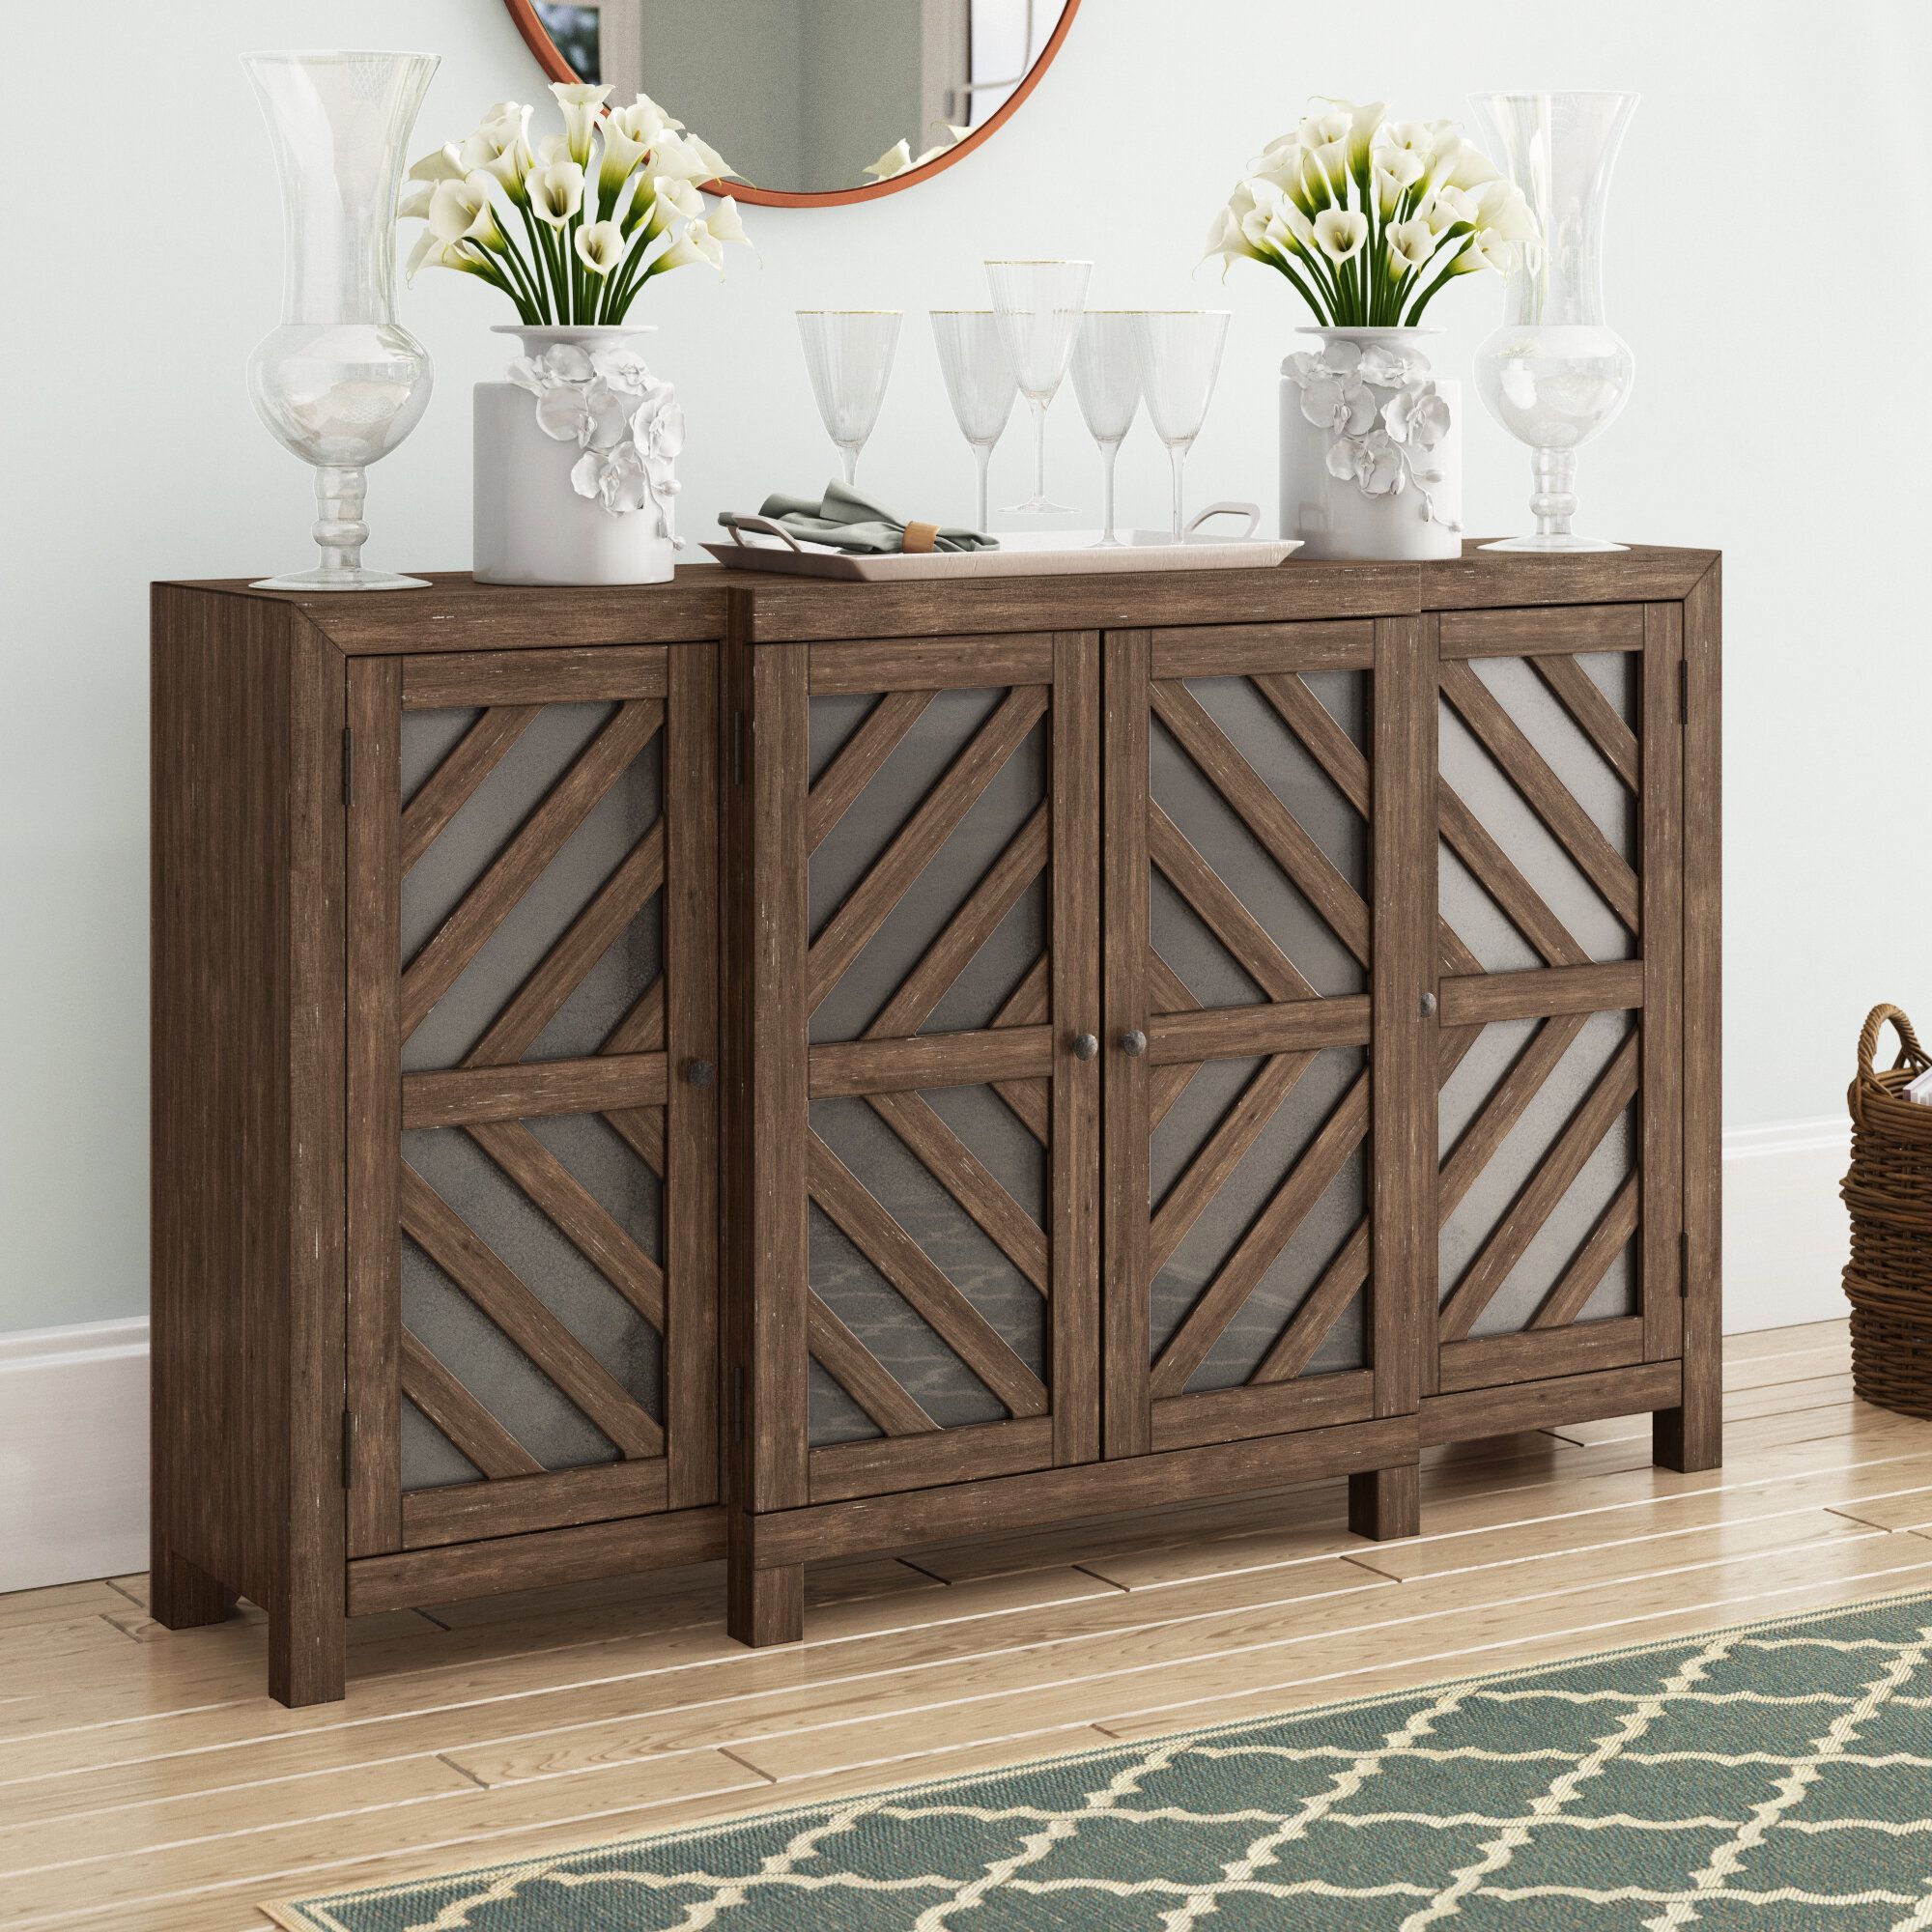 70 Inch Credenza You'll Love In 2019 | Wayfair Within Adelbert Credenzas (View 21 of 30)